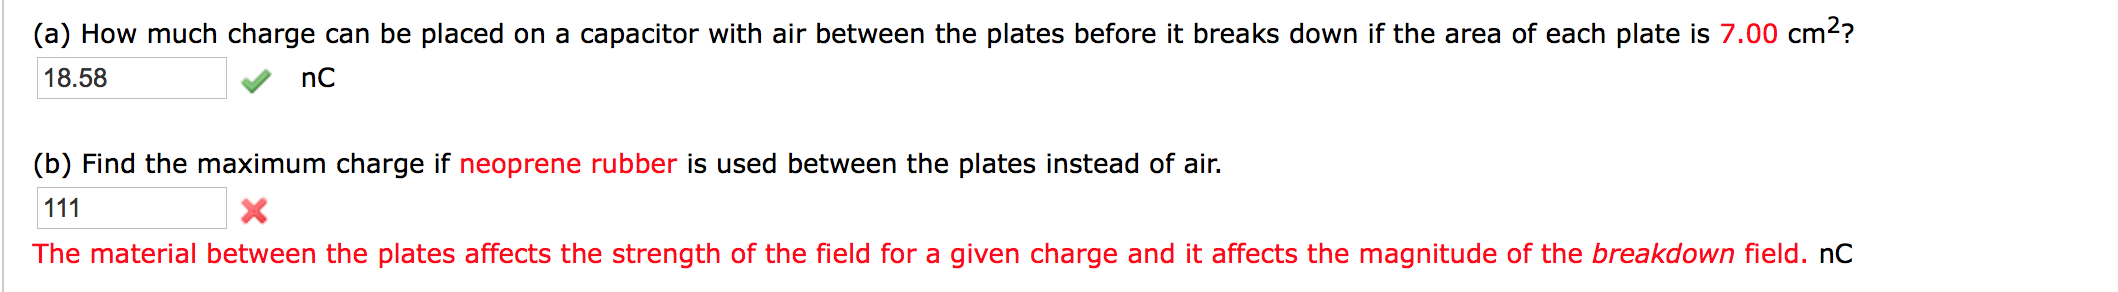 (a) How much charge can be placed on a capacitor with air between the plates before it breaks down if the area of each plate is 7.00 cm2?
18.58
(b) Find the maximum charge if neoprene rubber is used between the plates instead of air.
111
The material between the plates affects the strength of the field for a given charge and it affects the magnitude of the breakdown field. nC
